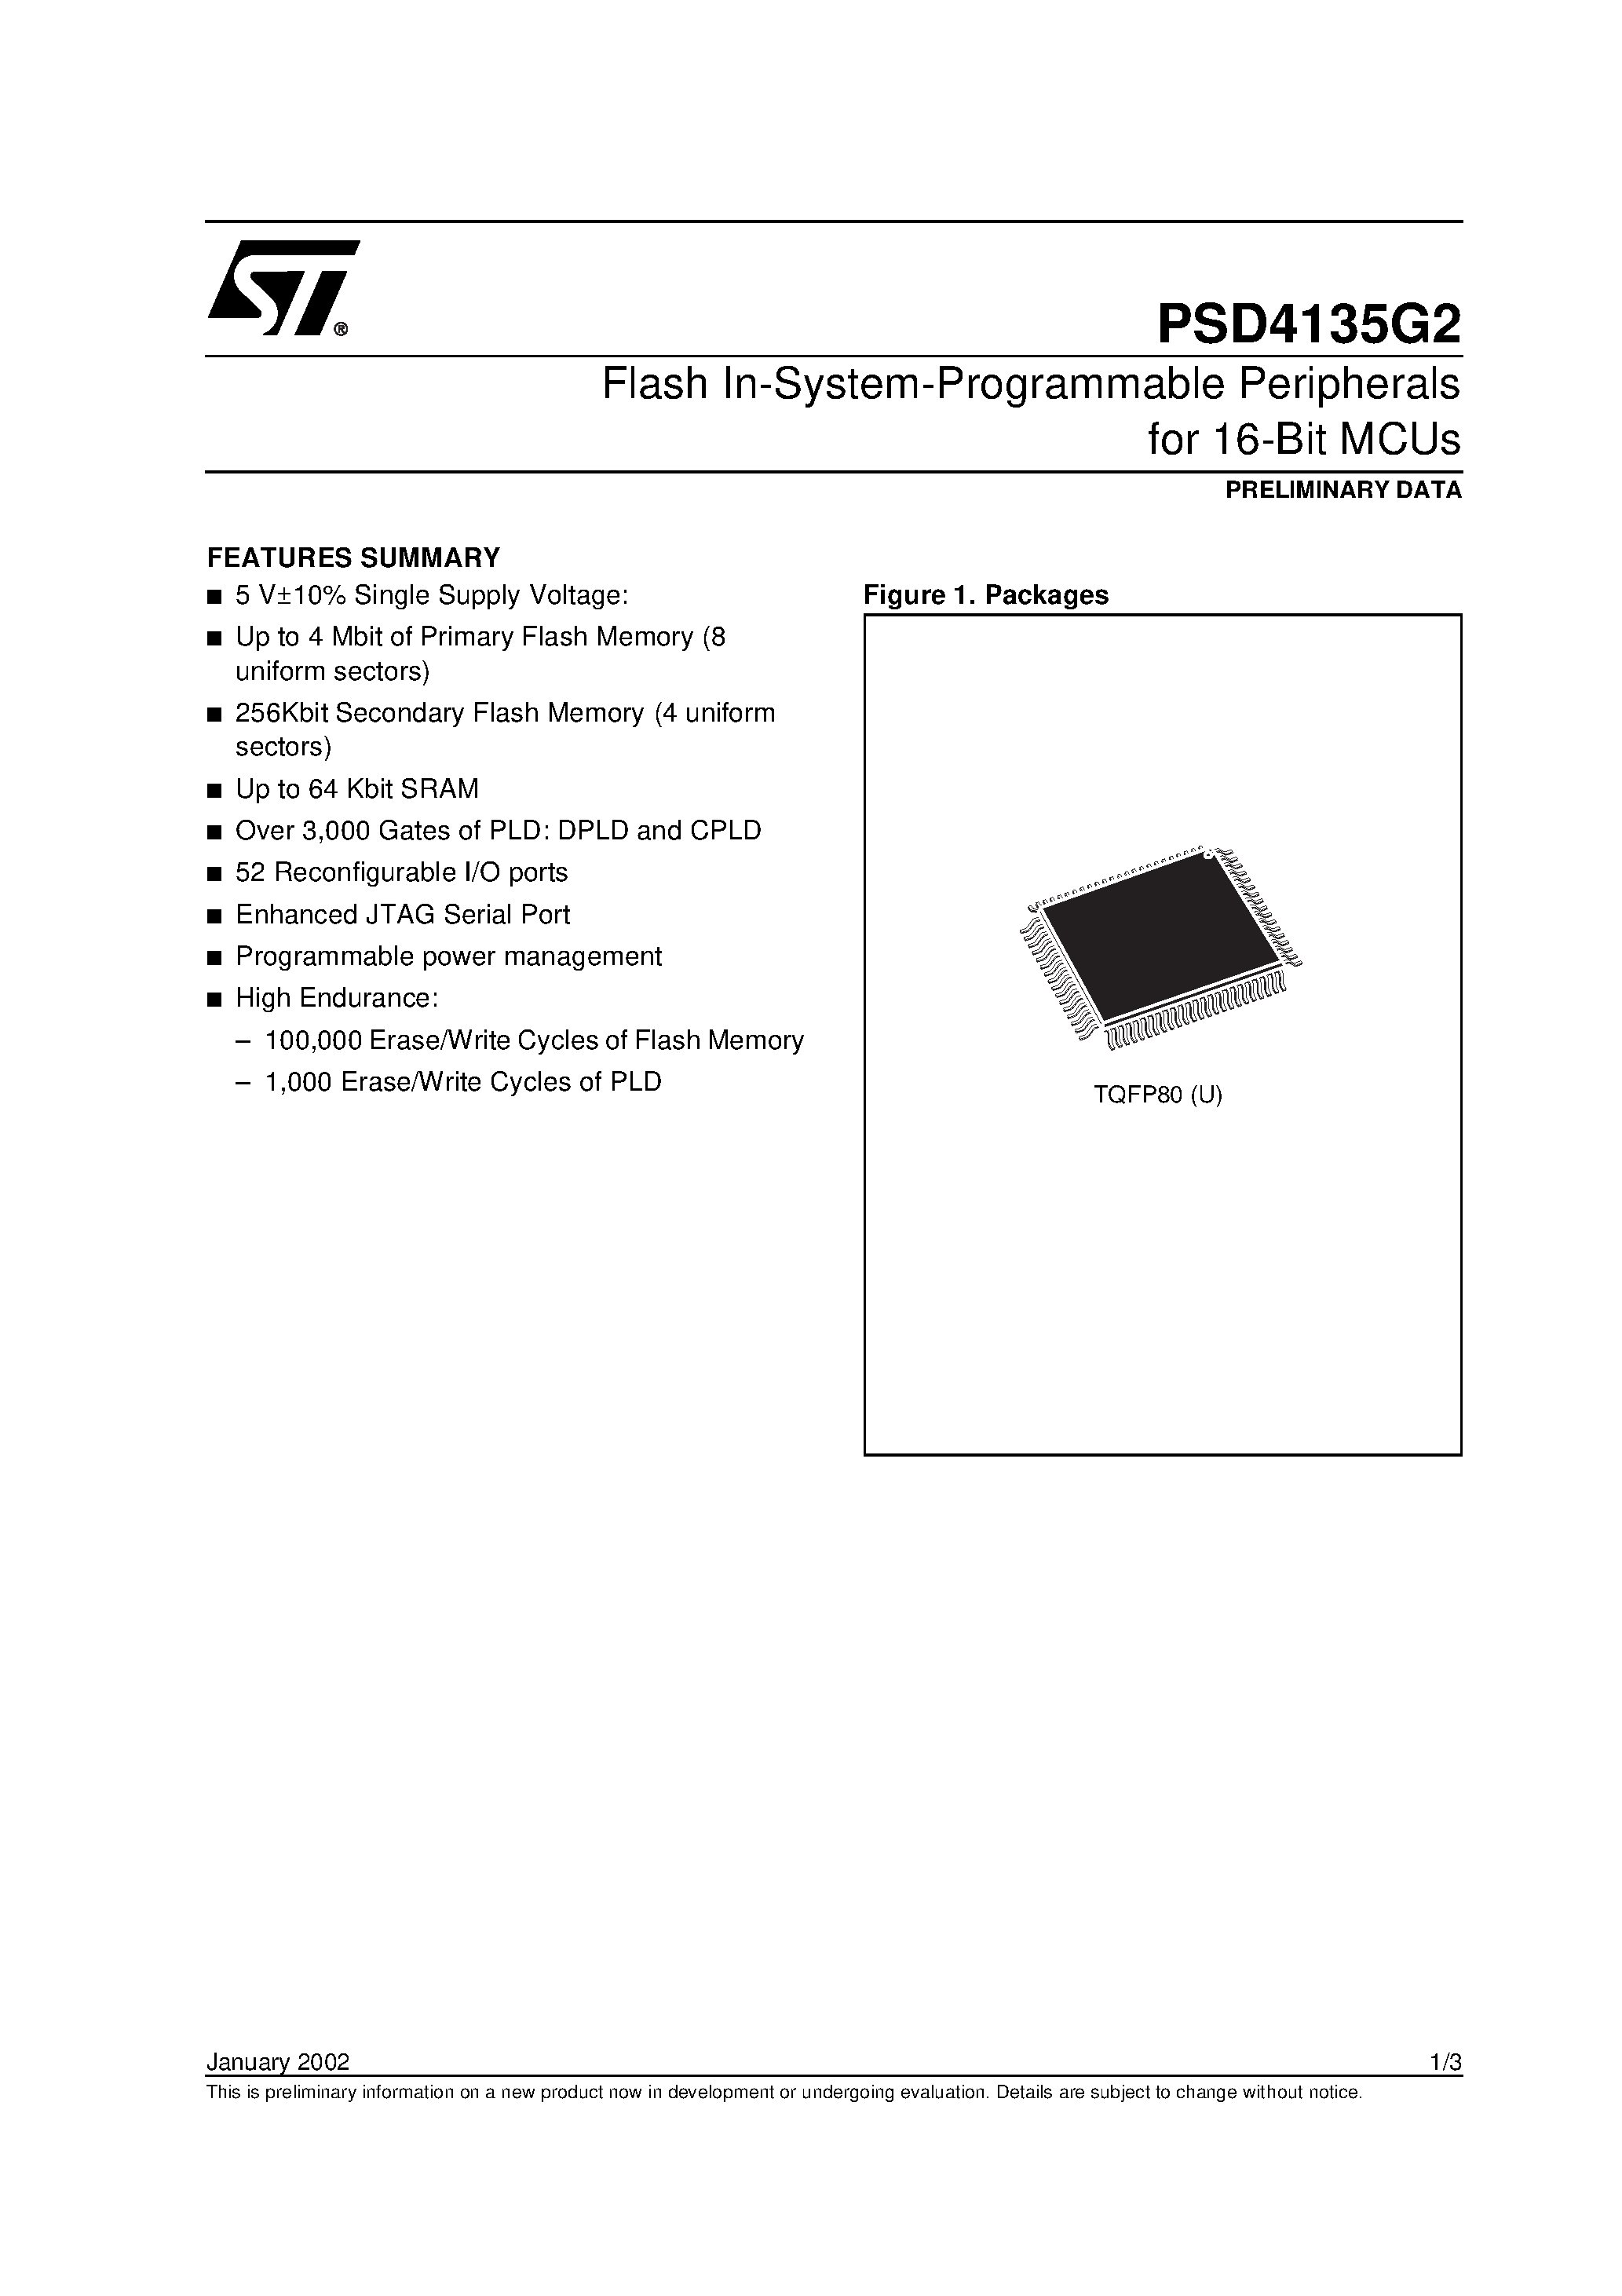 Даташит PSD4135F1-B-15B81 - Flash In-System-Programmable Peripherals for 16-Bit MCUs страница 1